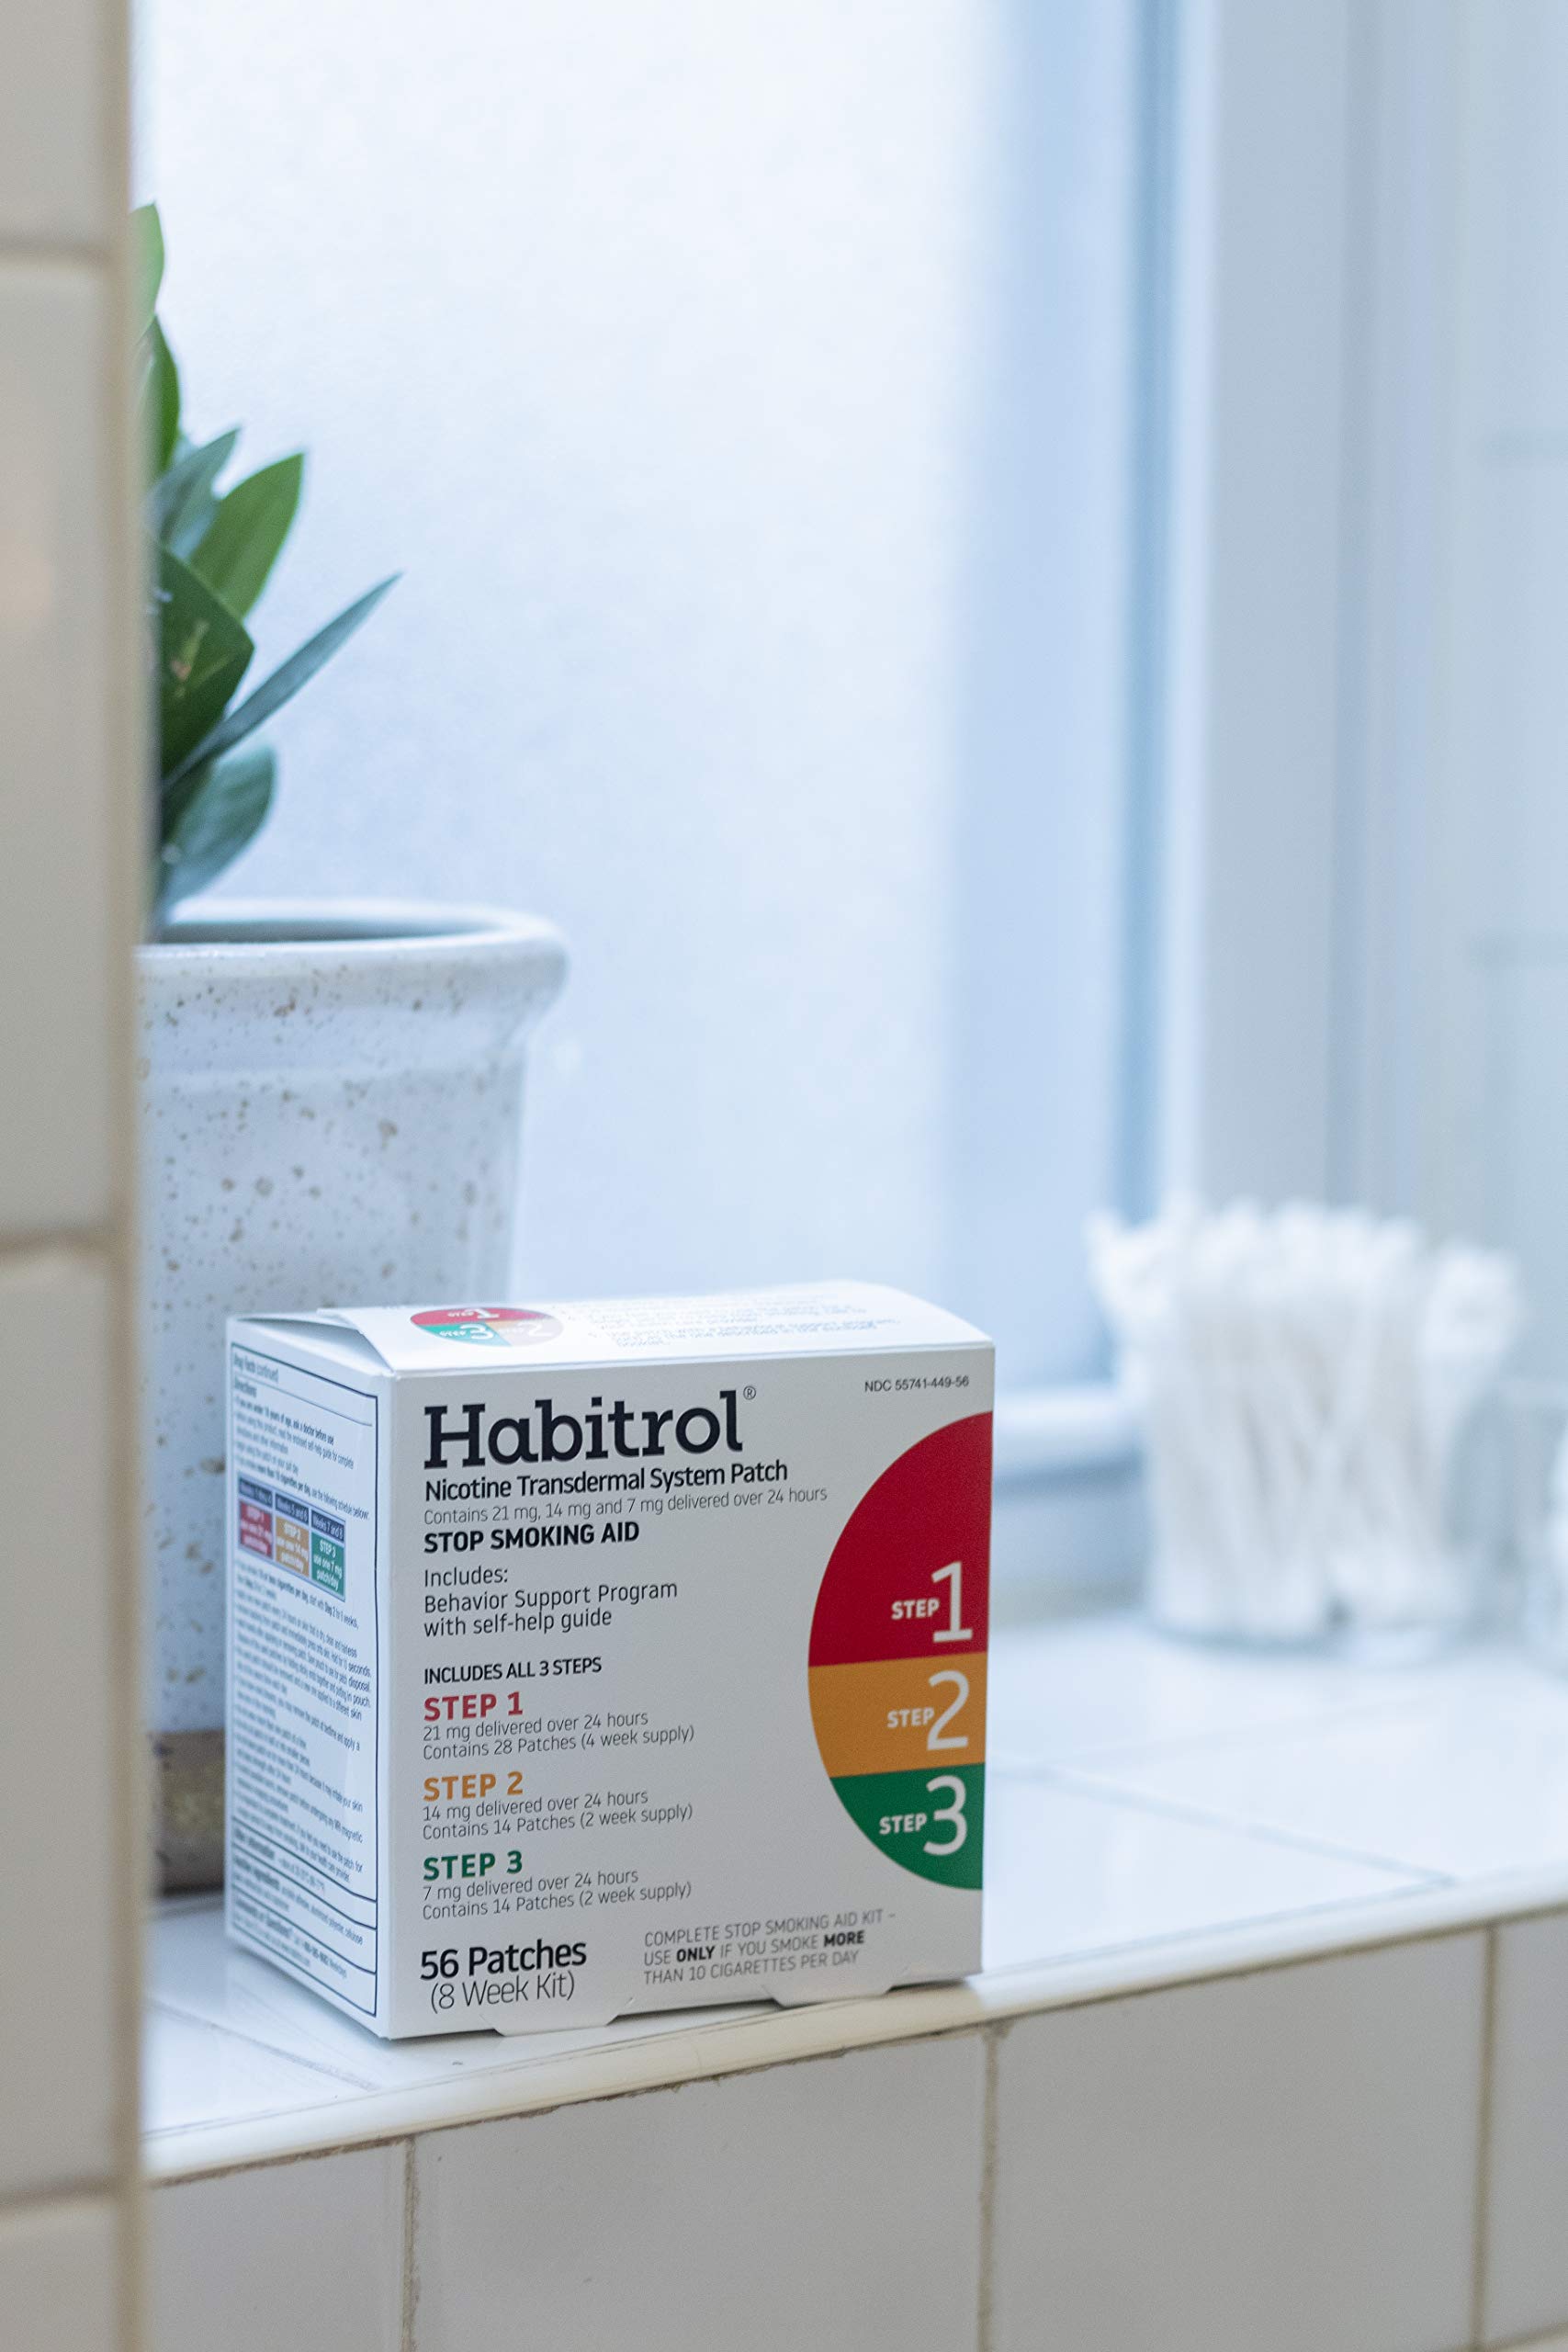 Habitrol Nicotine Transdermal System Patch | Stop Smoking Aid | Steps 1, 2, and 3 (21, 14, and 7 mg) | 56 Patches (8 Week Kit)